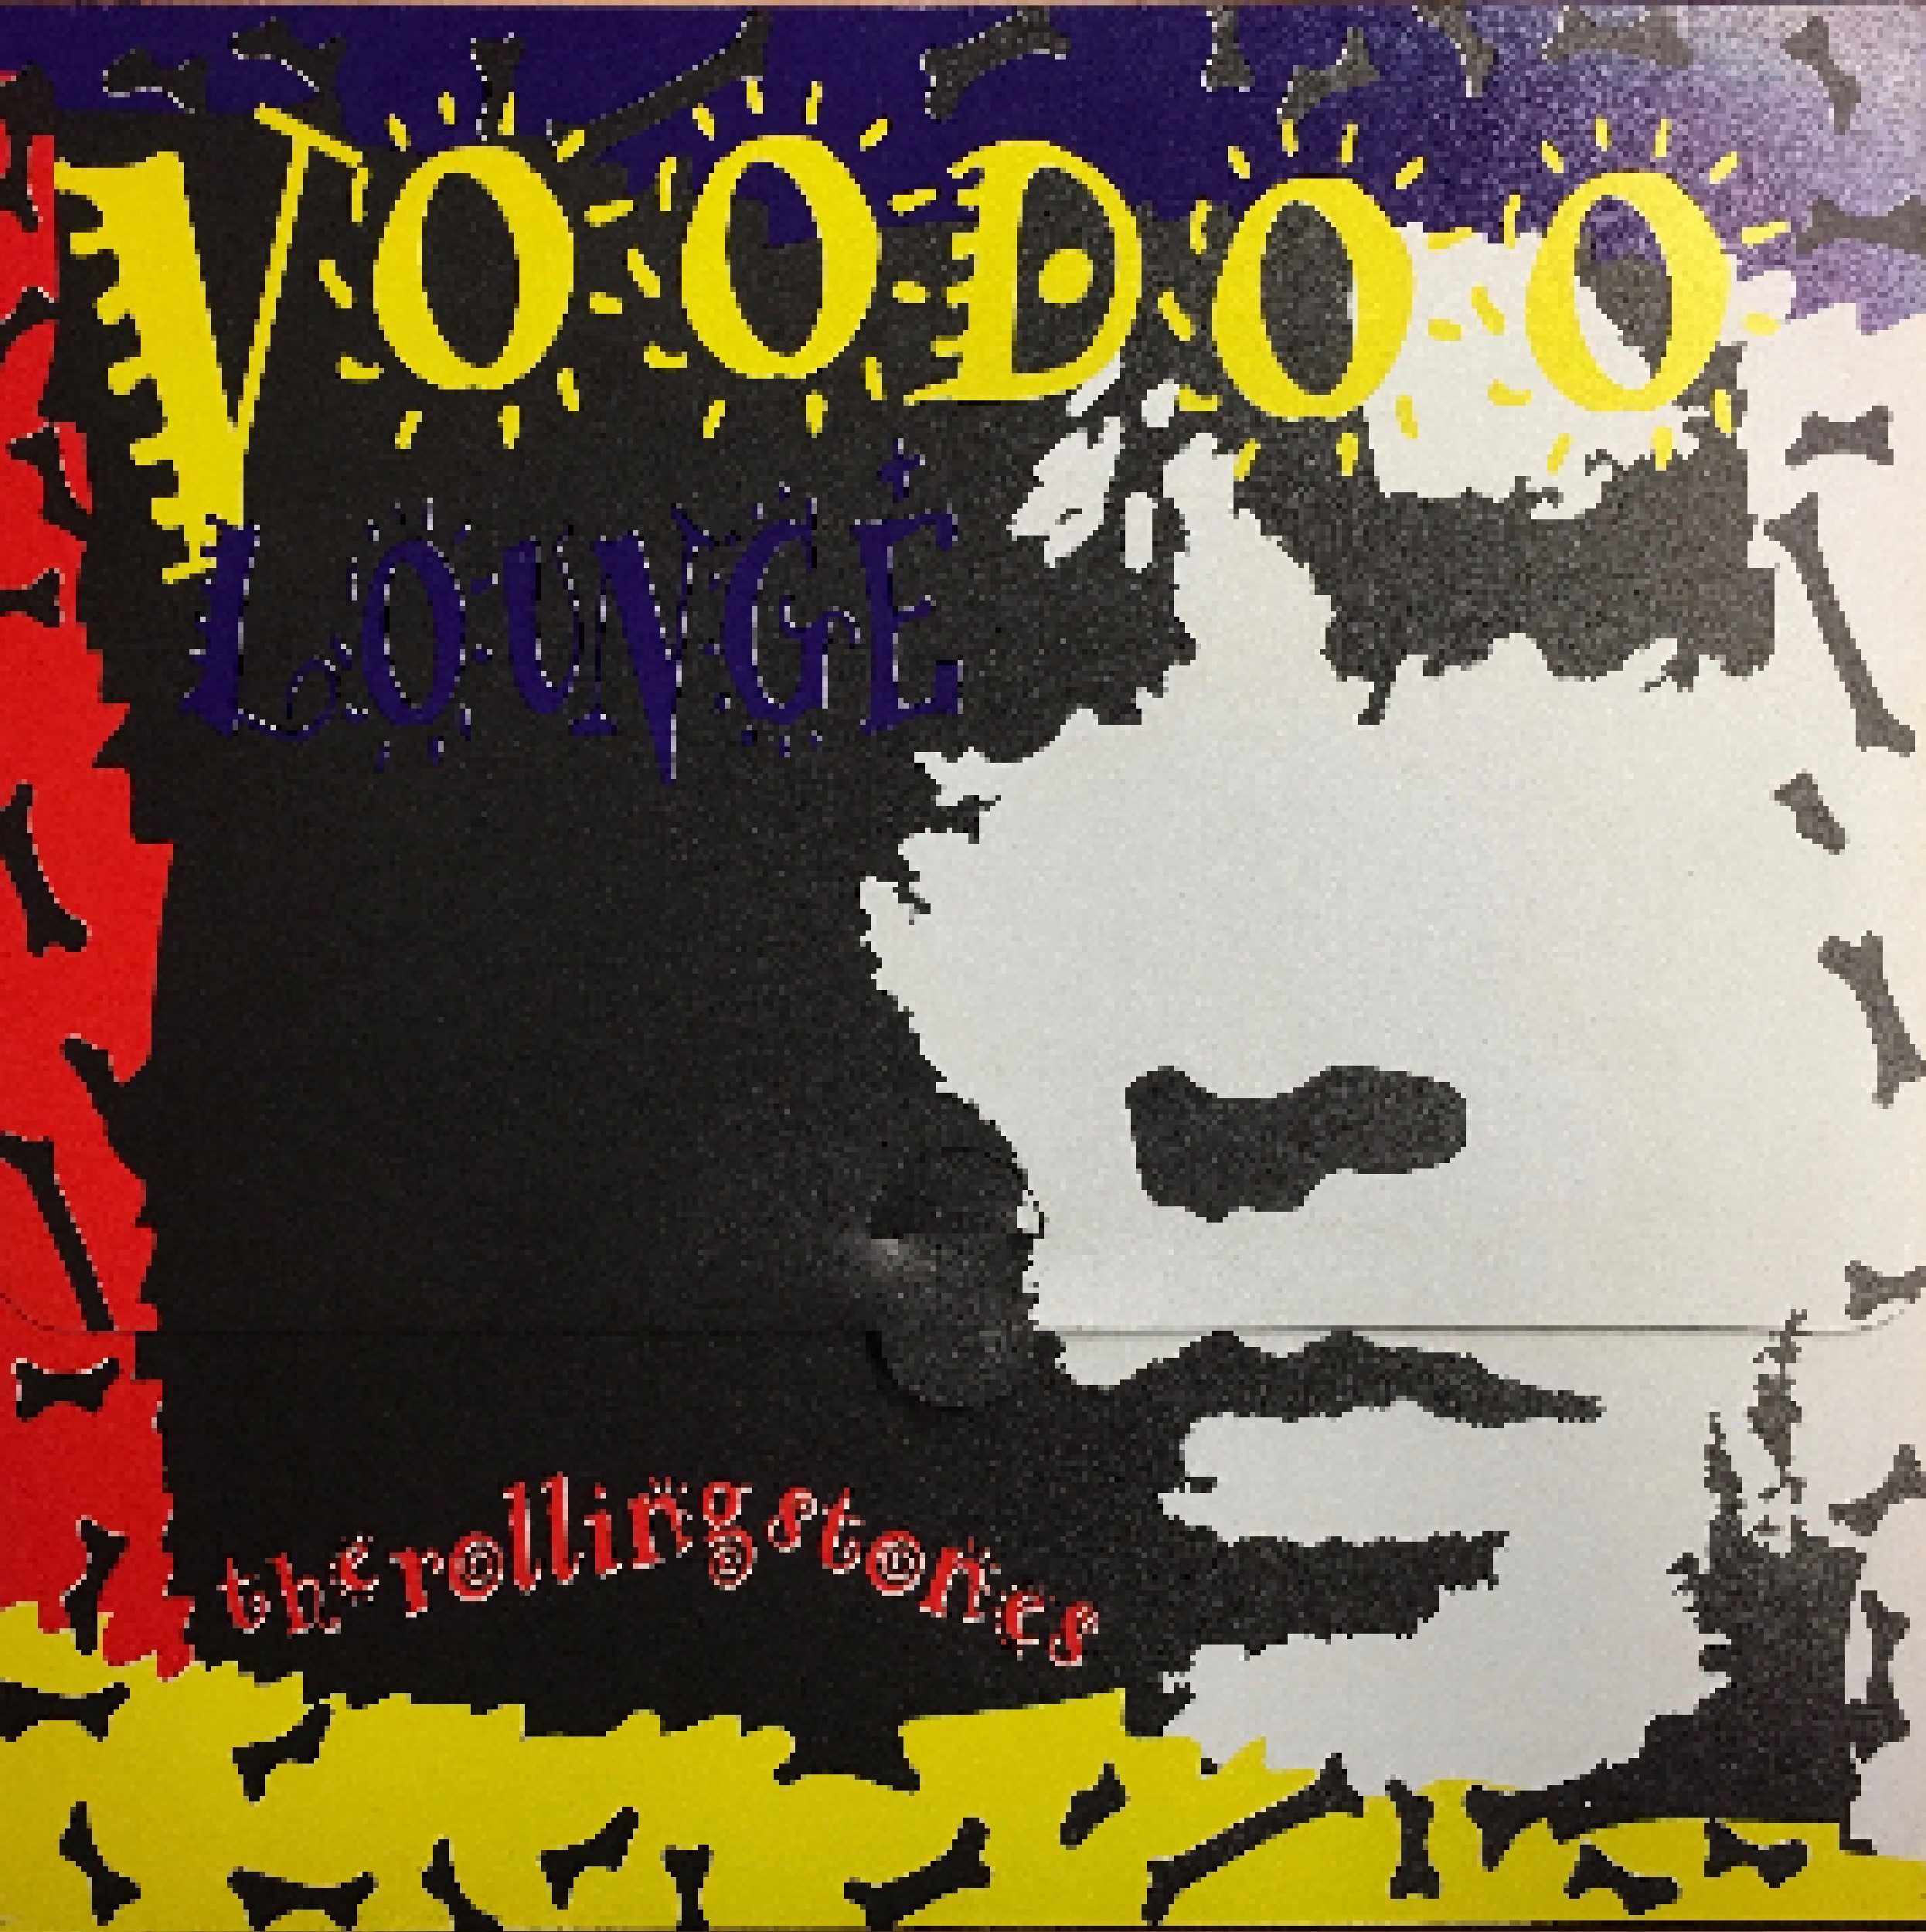 Voodoo Lounge 2 Lp Cd 1994 Box Limited Edition Special Edition